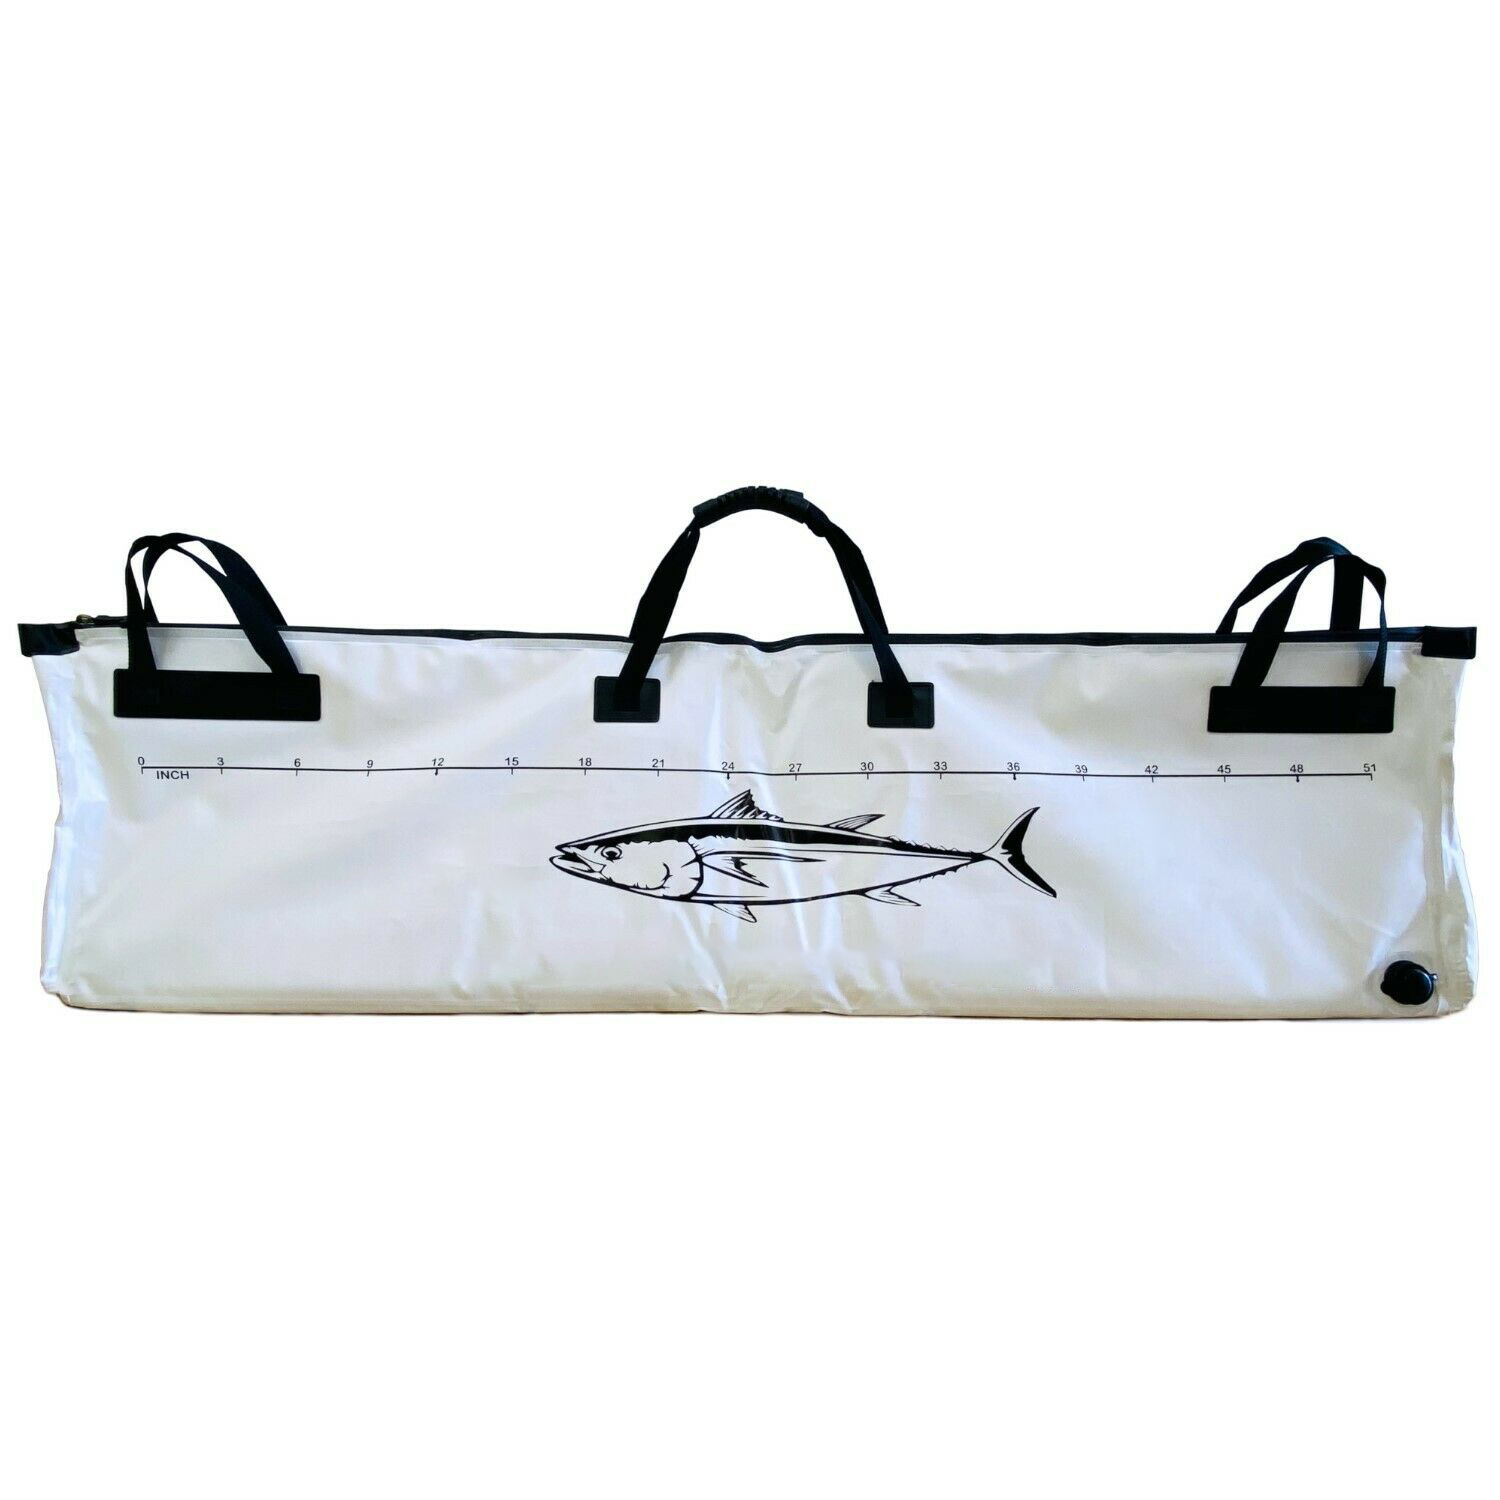 How to Choose a Fishing Cooler Bag?